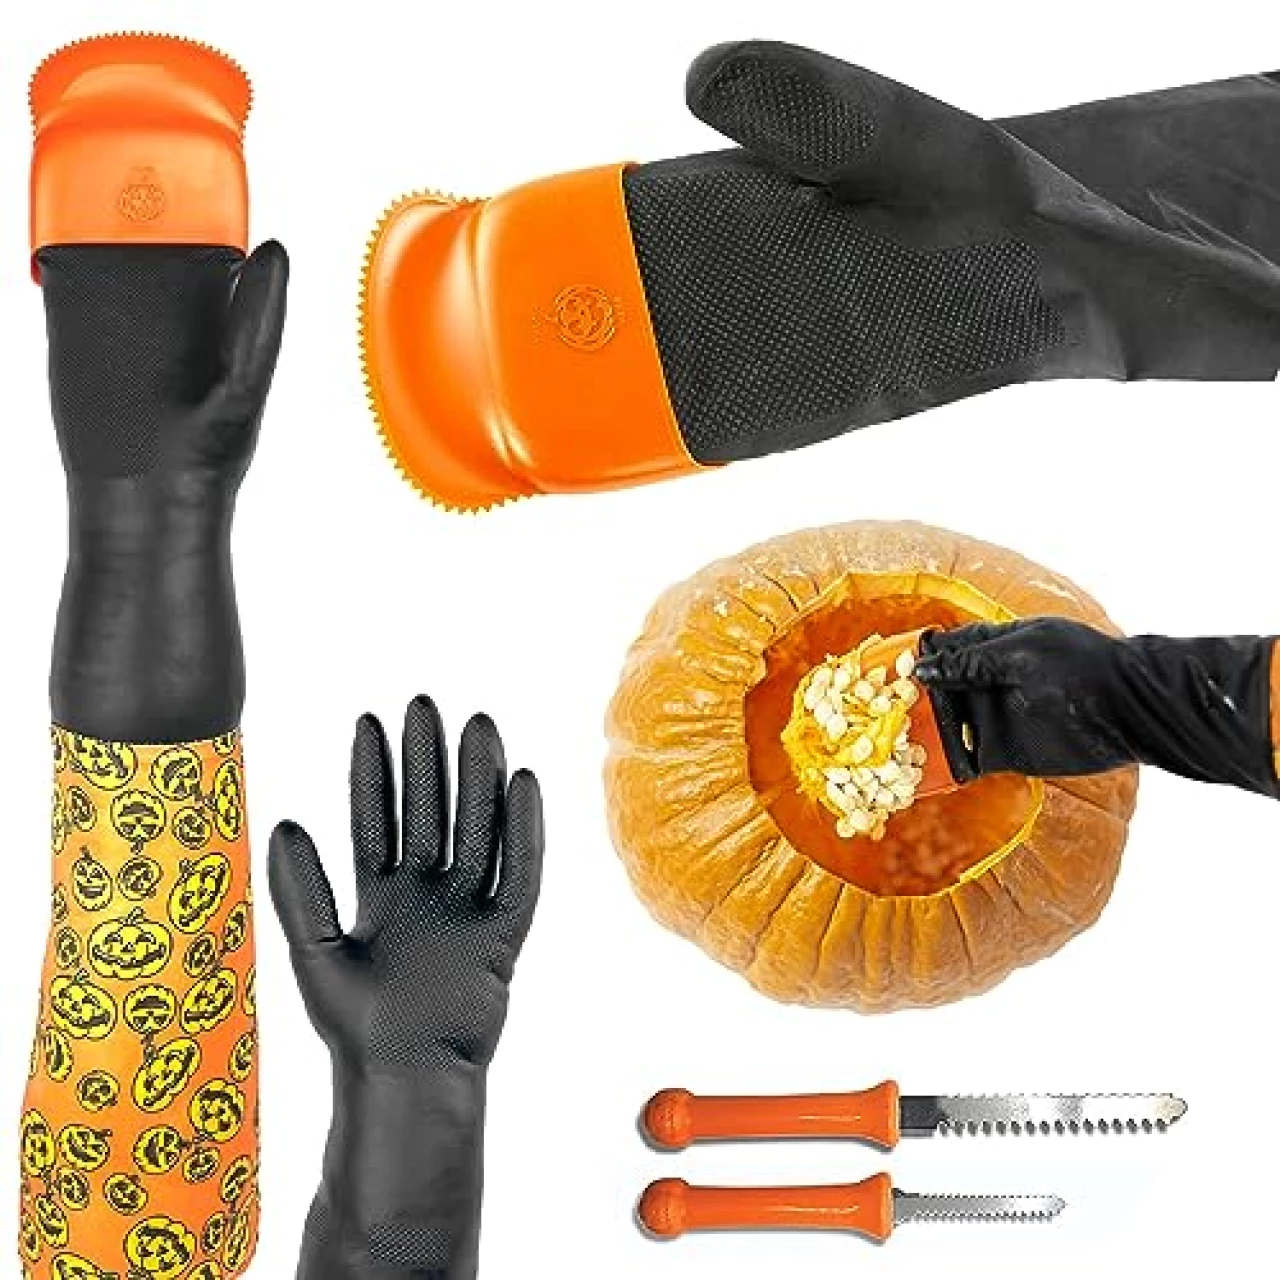 Halloween Moments Pumpkin Scraper Glove – As Seen On Shark Tank - Mess Free and Fun Pumpkin Carving Kit – Carve and Clean Jack-O-Lantern Guts with Ease and Zero Mess on Your Hands!